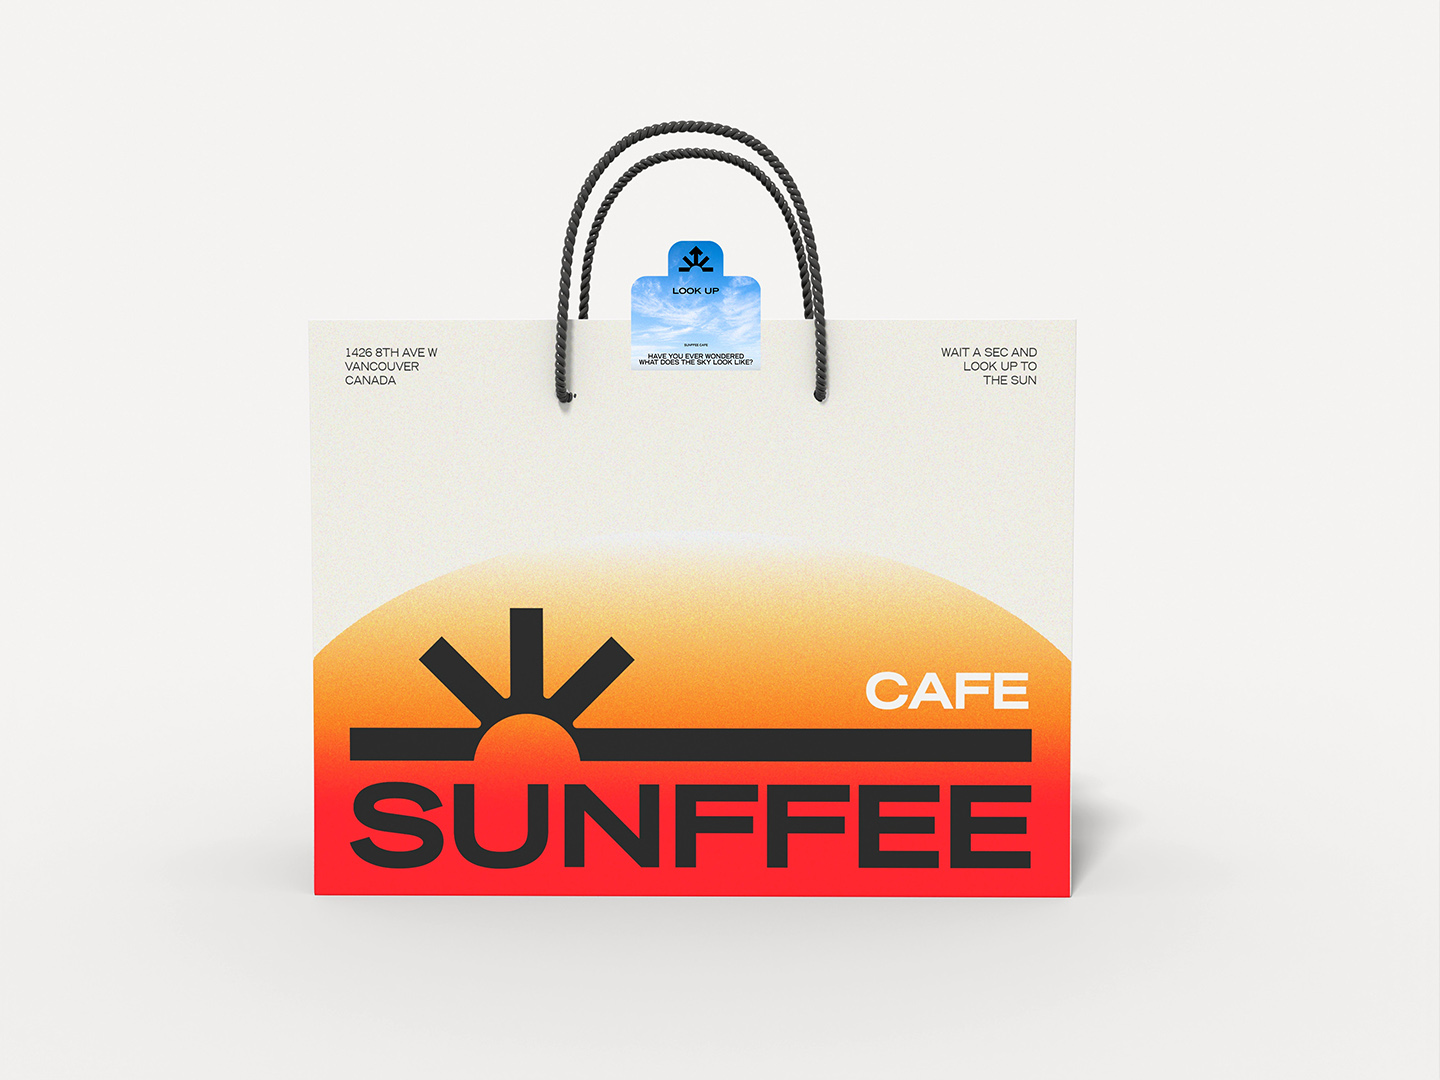 advertisement of sunffee cafe bag